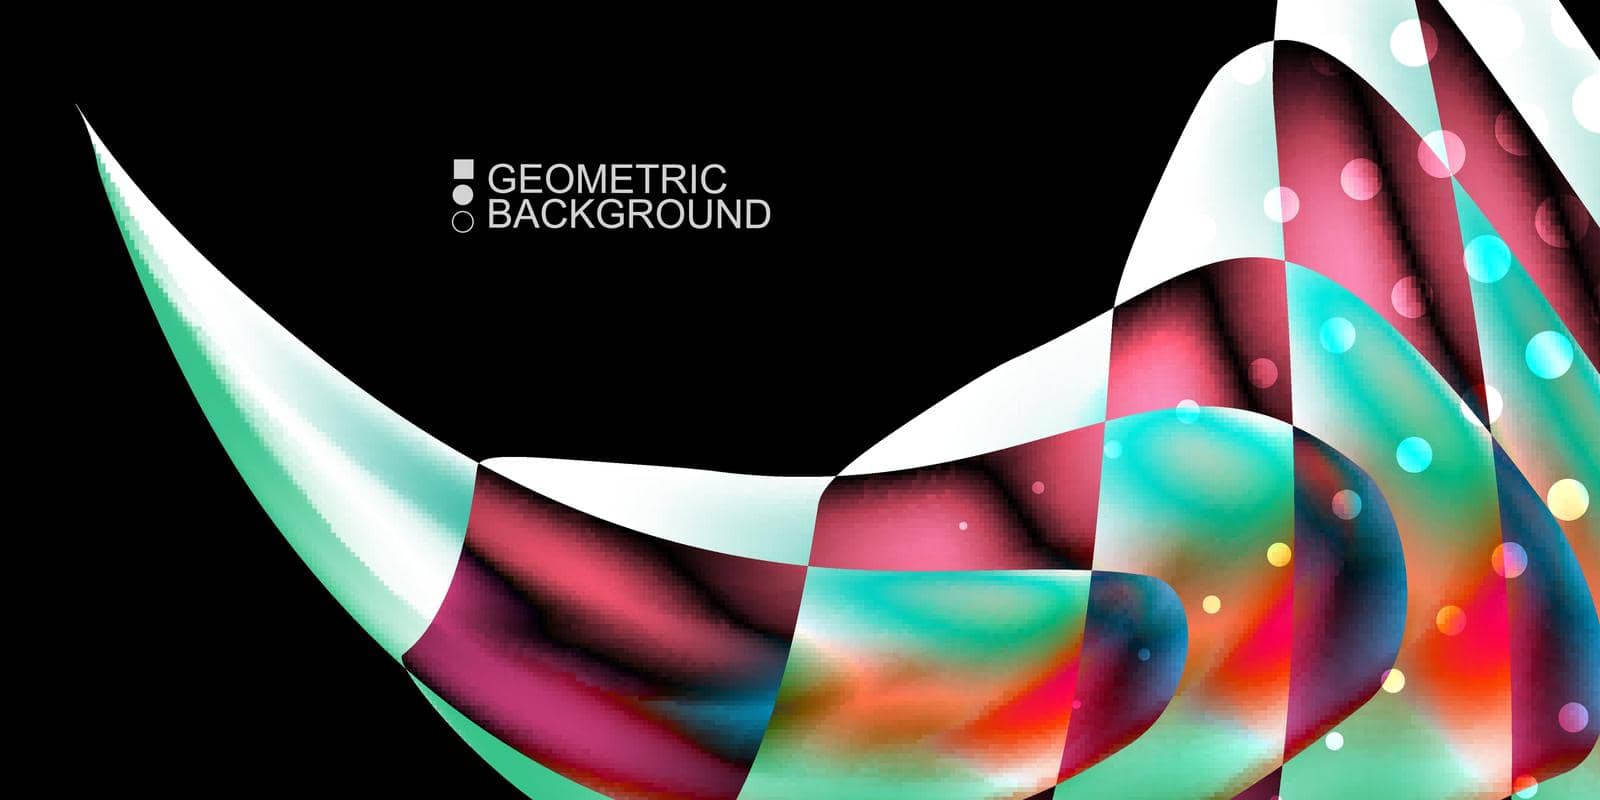 Geometric colorful abstract background by stocklady